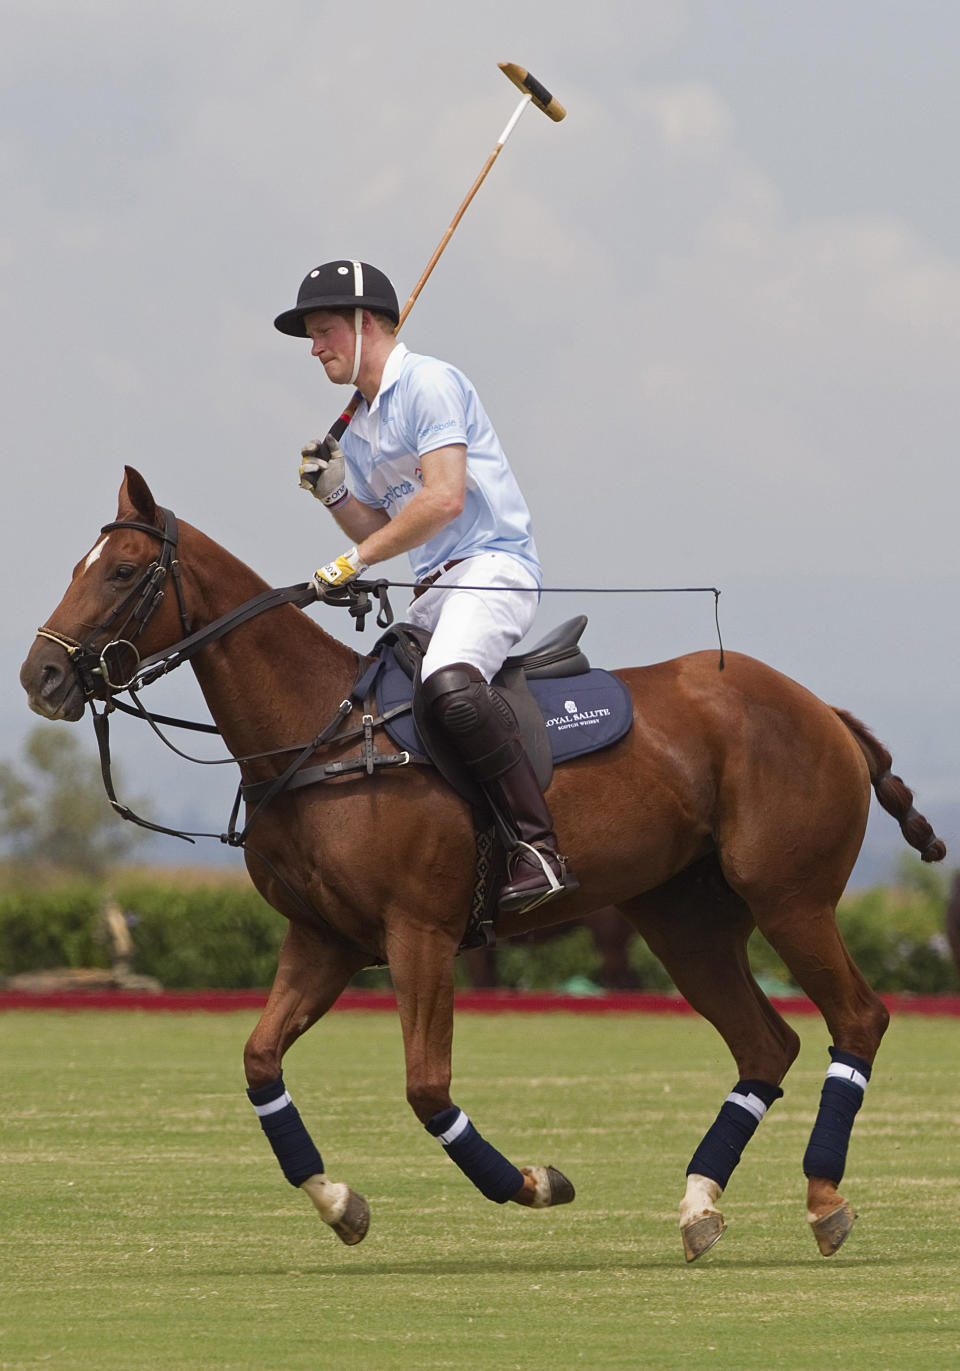 Britain's Prince Harry plays a charity polo match in Campinas, Brazil, Sunday March 11, 2012. Prince Harry is in Brazil at the request of the British government on a trip to promote ties and emphasize the transition from the upcoming 2012 London Games to the 2016 Olympics in Rio de Janeiro. (AP Photo/Andre Penner)